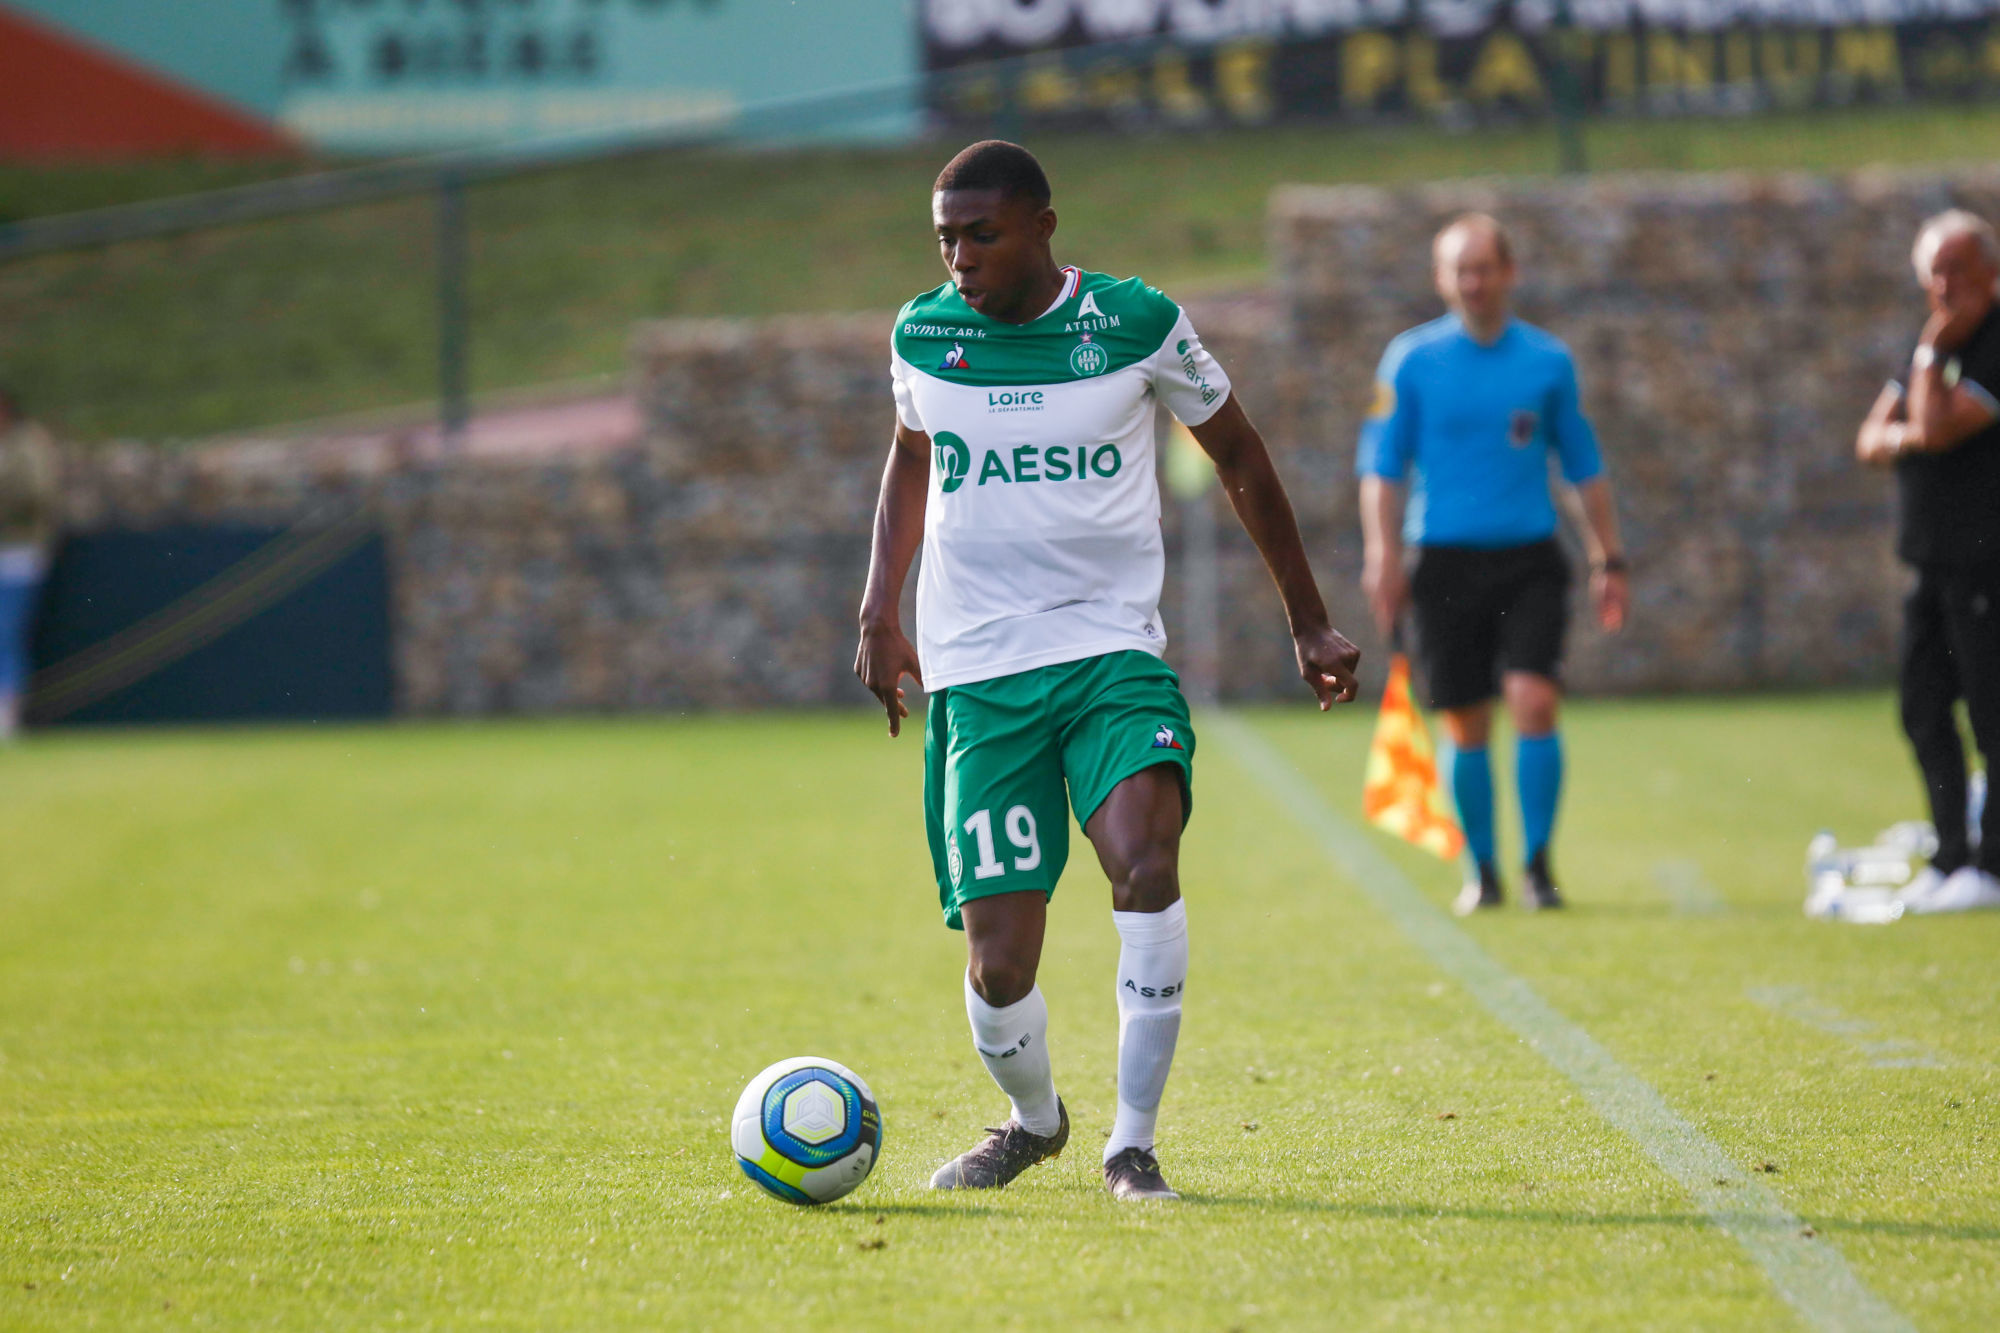 Sissoko Alpha of Saint Etienne during the Friendly match between Andrezieux and Saint Etienne at L'Envol Stadium on July 9, 2019 in Andrezieux-Boutheon, France. (Photo by Romain Biard/Icon Sport)